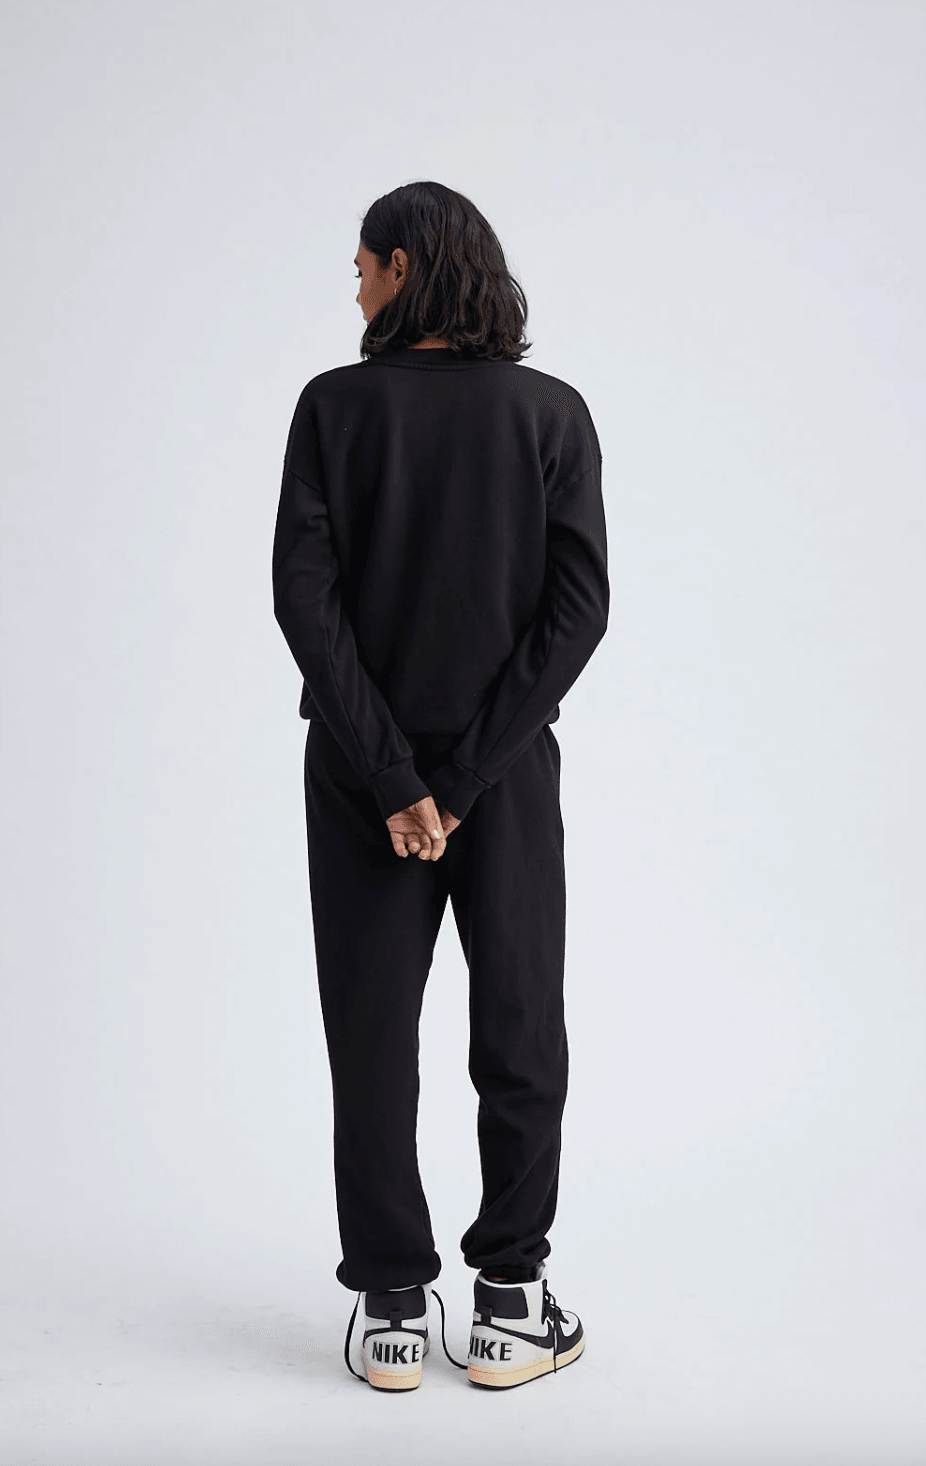 Heart Sweatpant in Glossy Black by SPRWMN